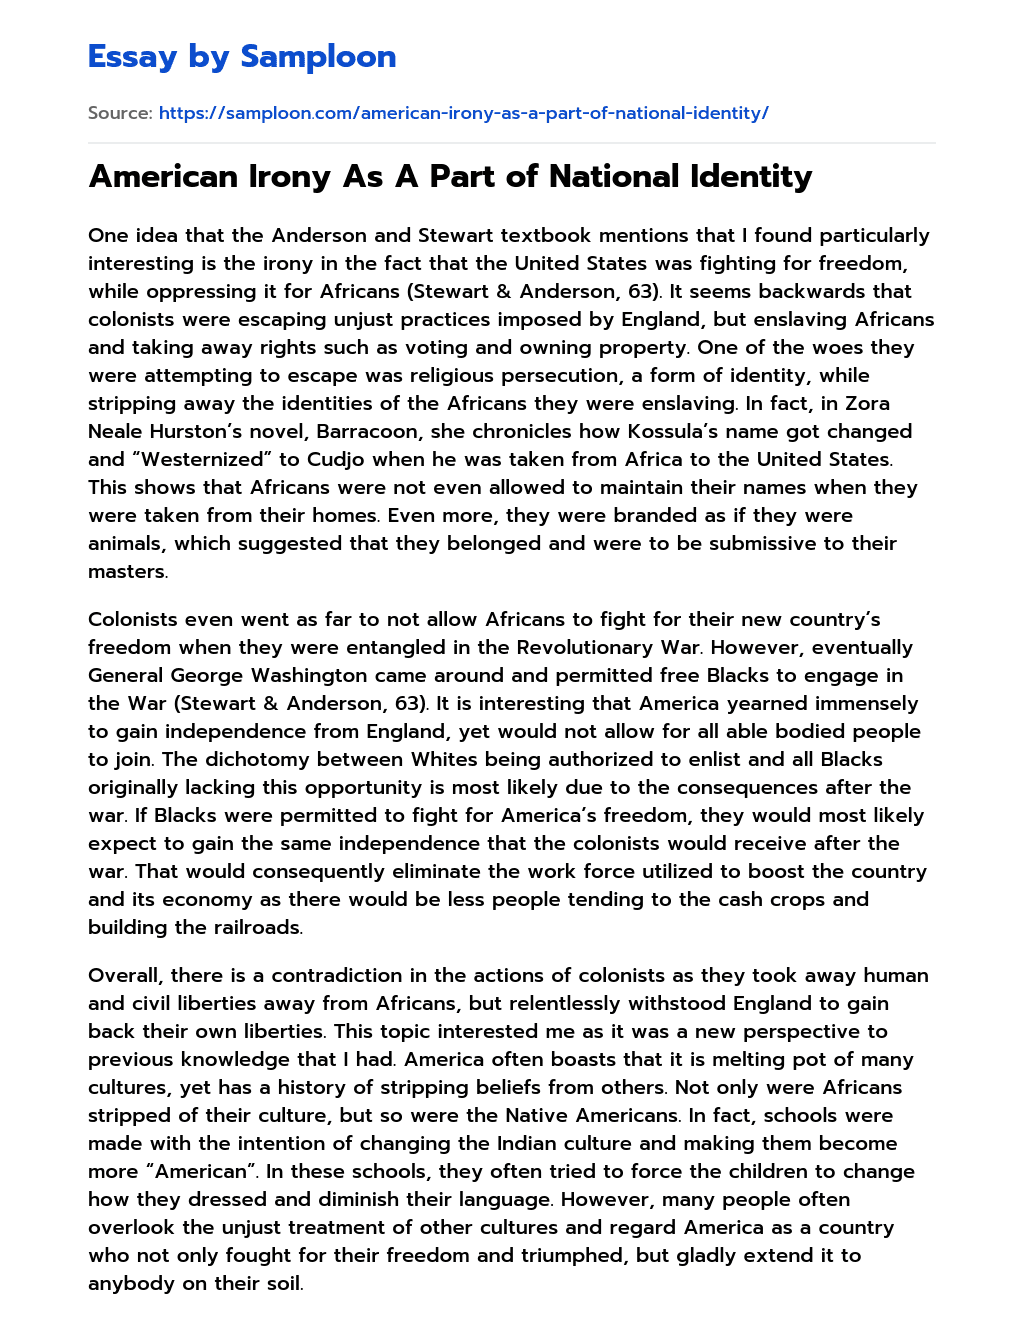 American Irony As A Part of National Identity essay